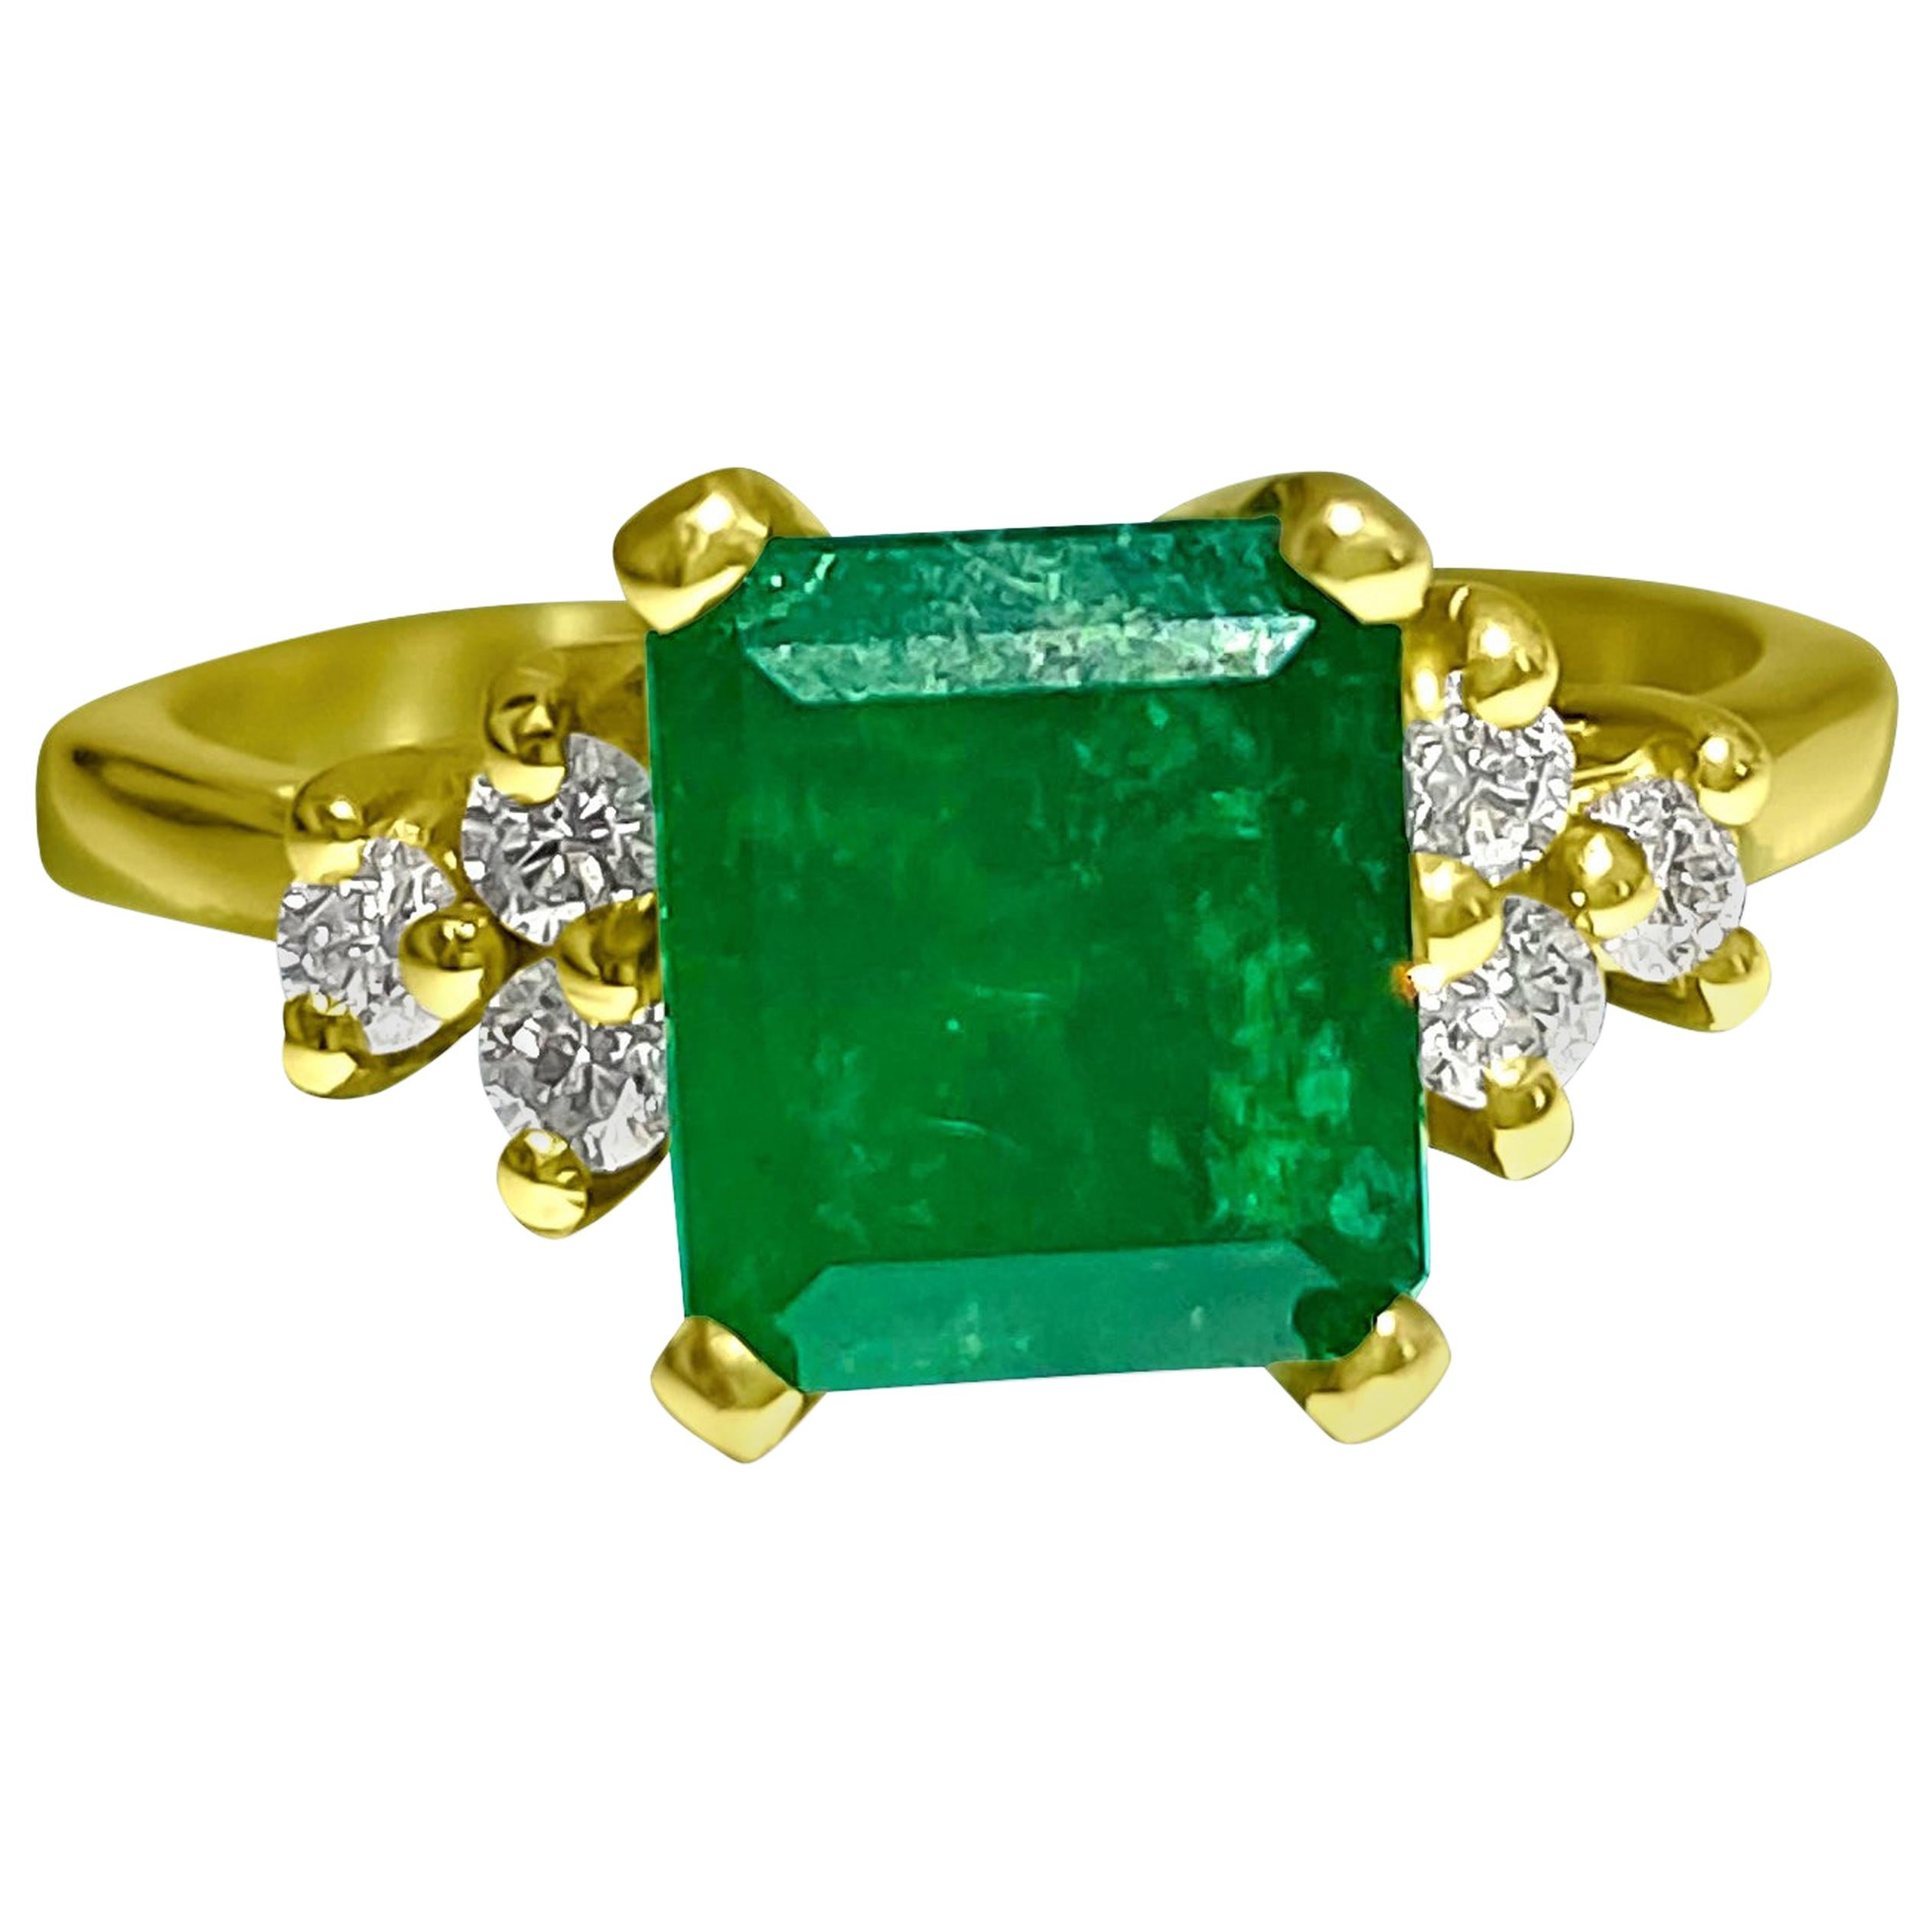 2.50 Carat Natural Colombian Emerald Diamond Cocktail Ring 14 Karat Yellow Gold For Sale